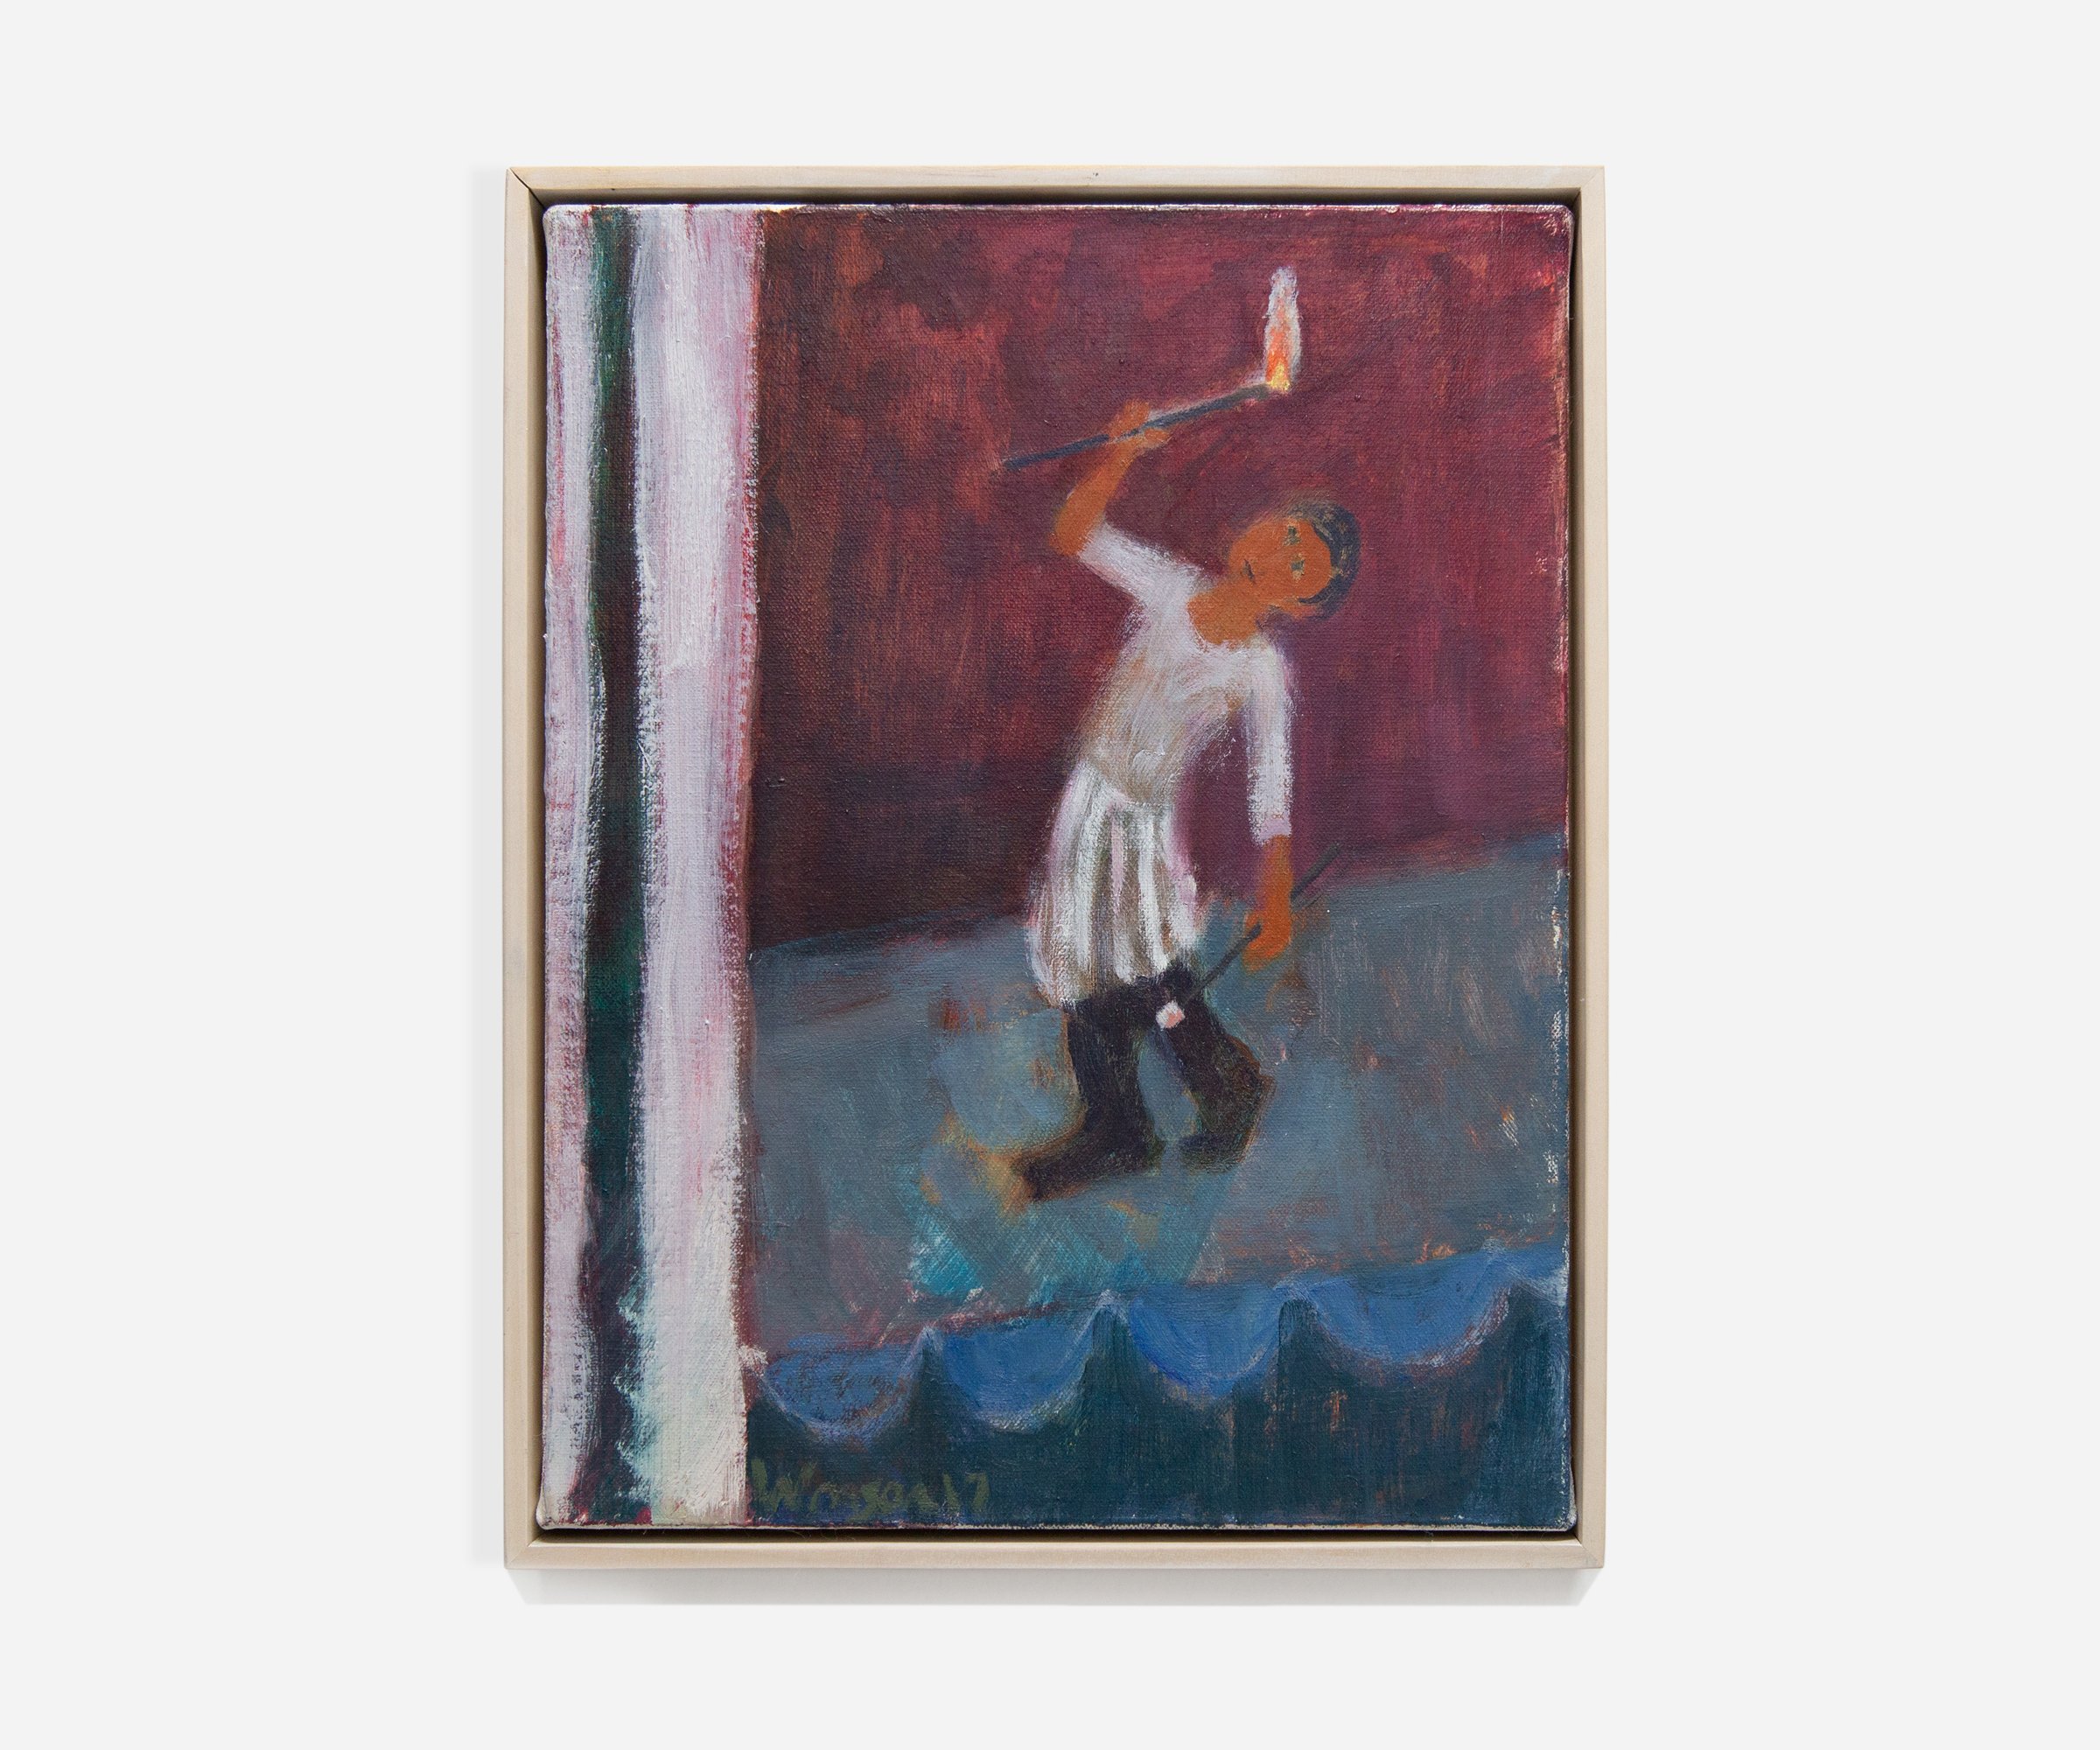   Fire Eater , 2019, Oil on canvas, 13 x 10”       